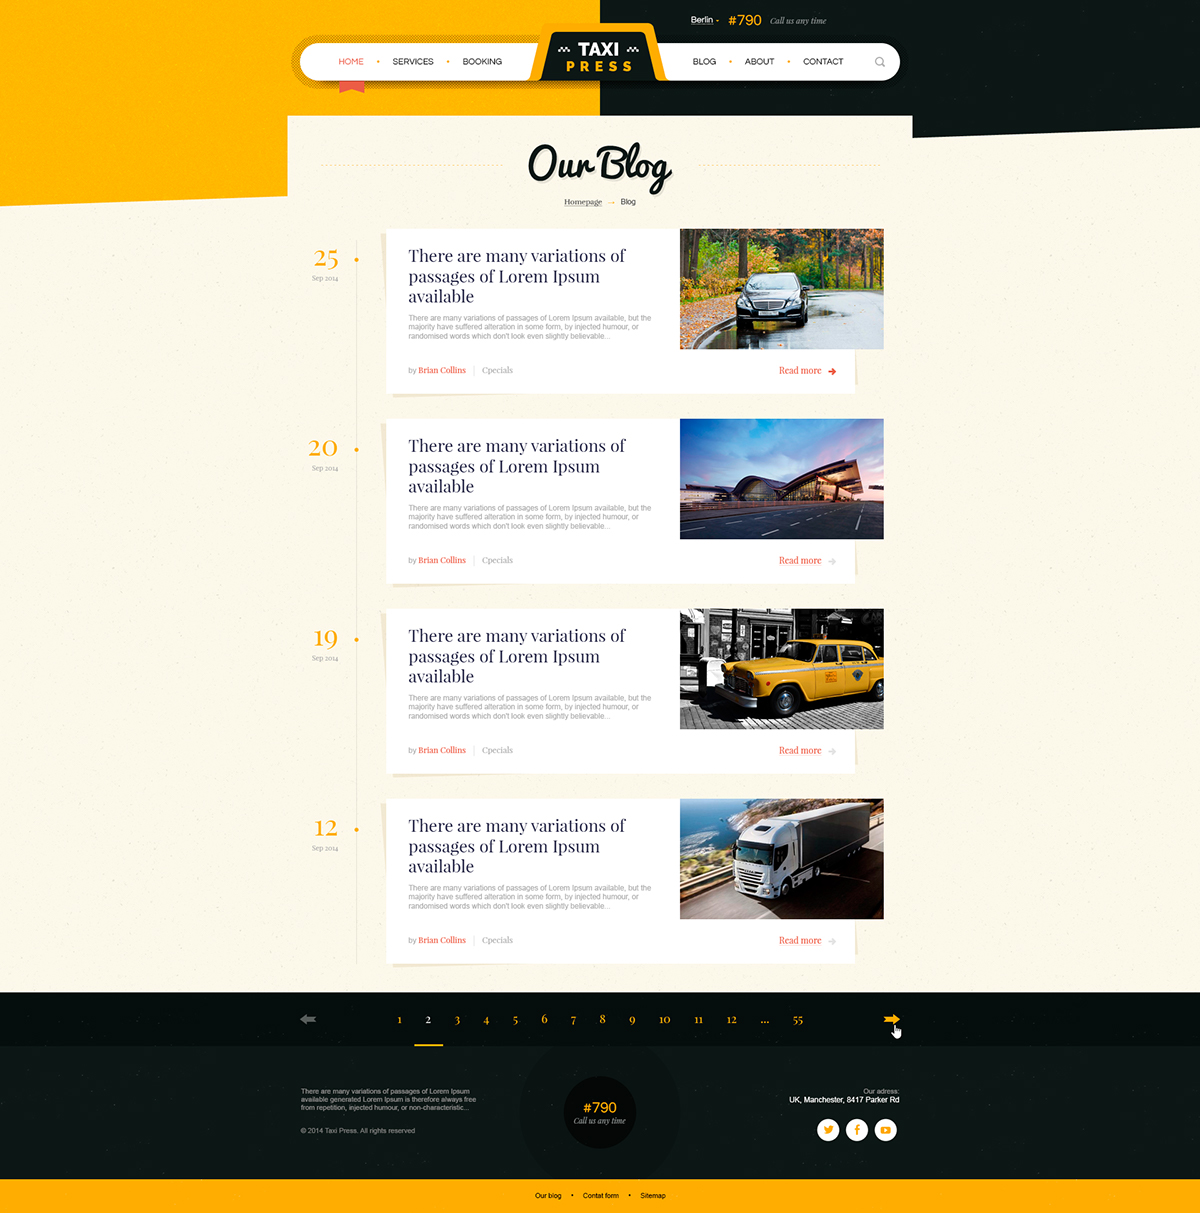 alethemes envato themeforest HTML template wordpress coding code taxi taxipress